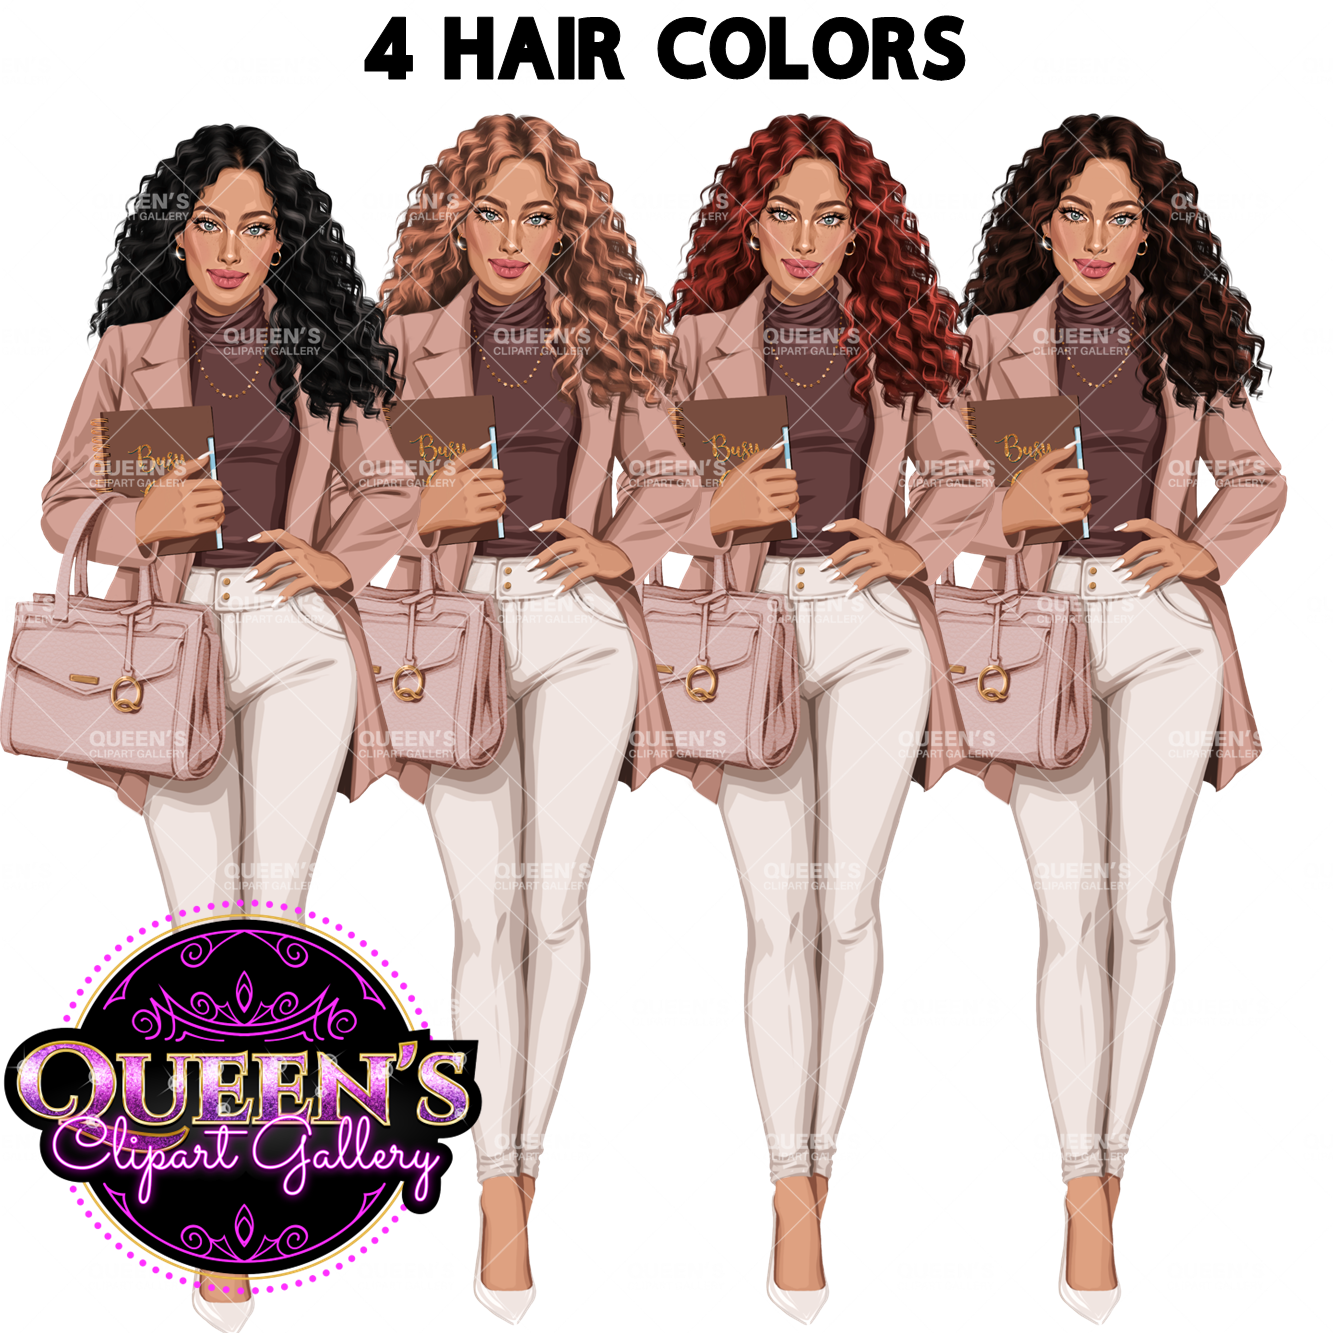 Planner girl clipart, Afro girl clipart, Lady boss clipart, Girl boss clipart, Fashion girl, African American woman, Business woman clipart